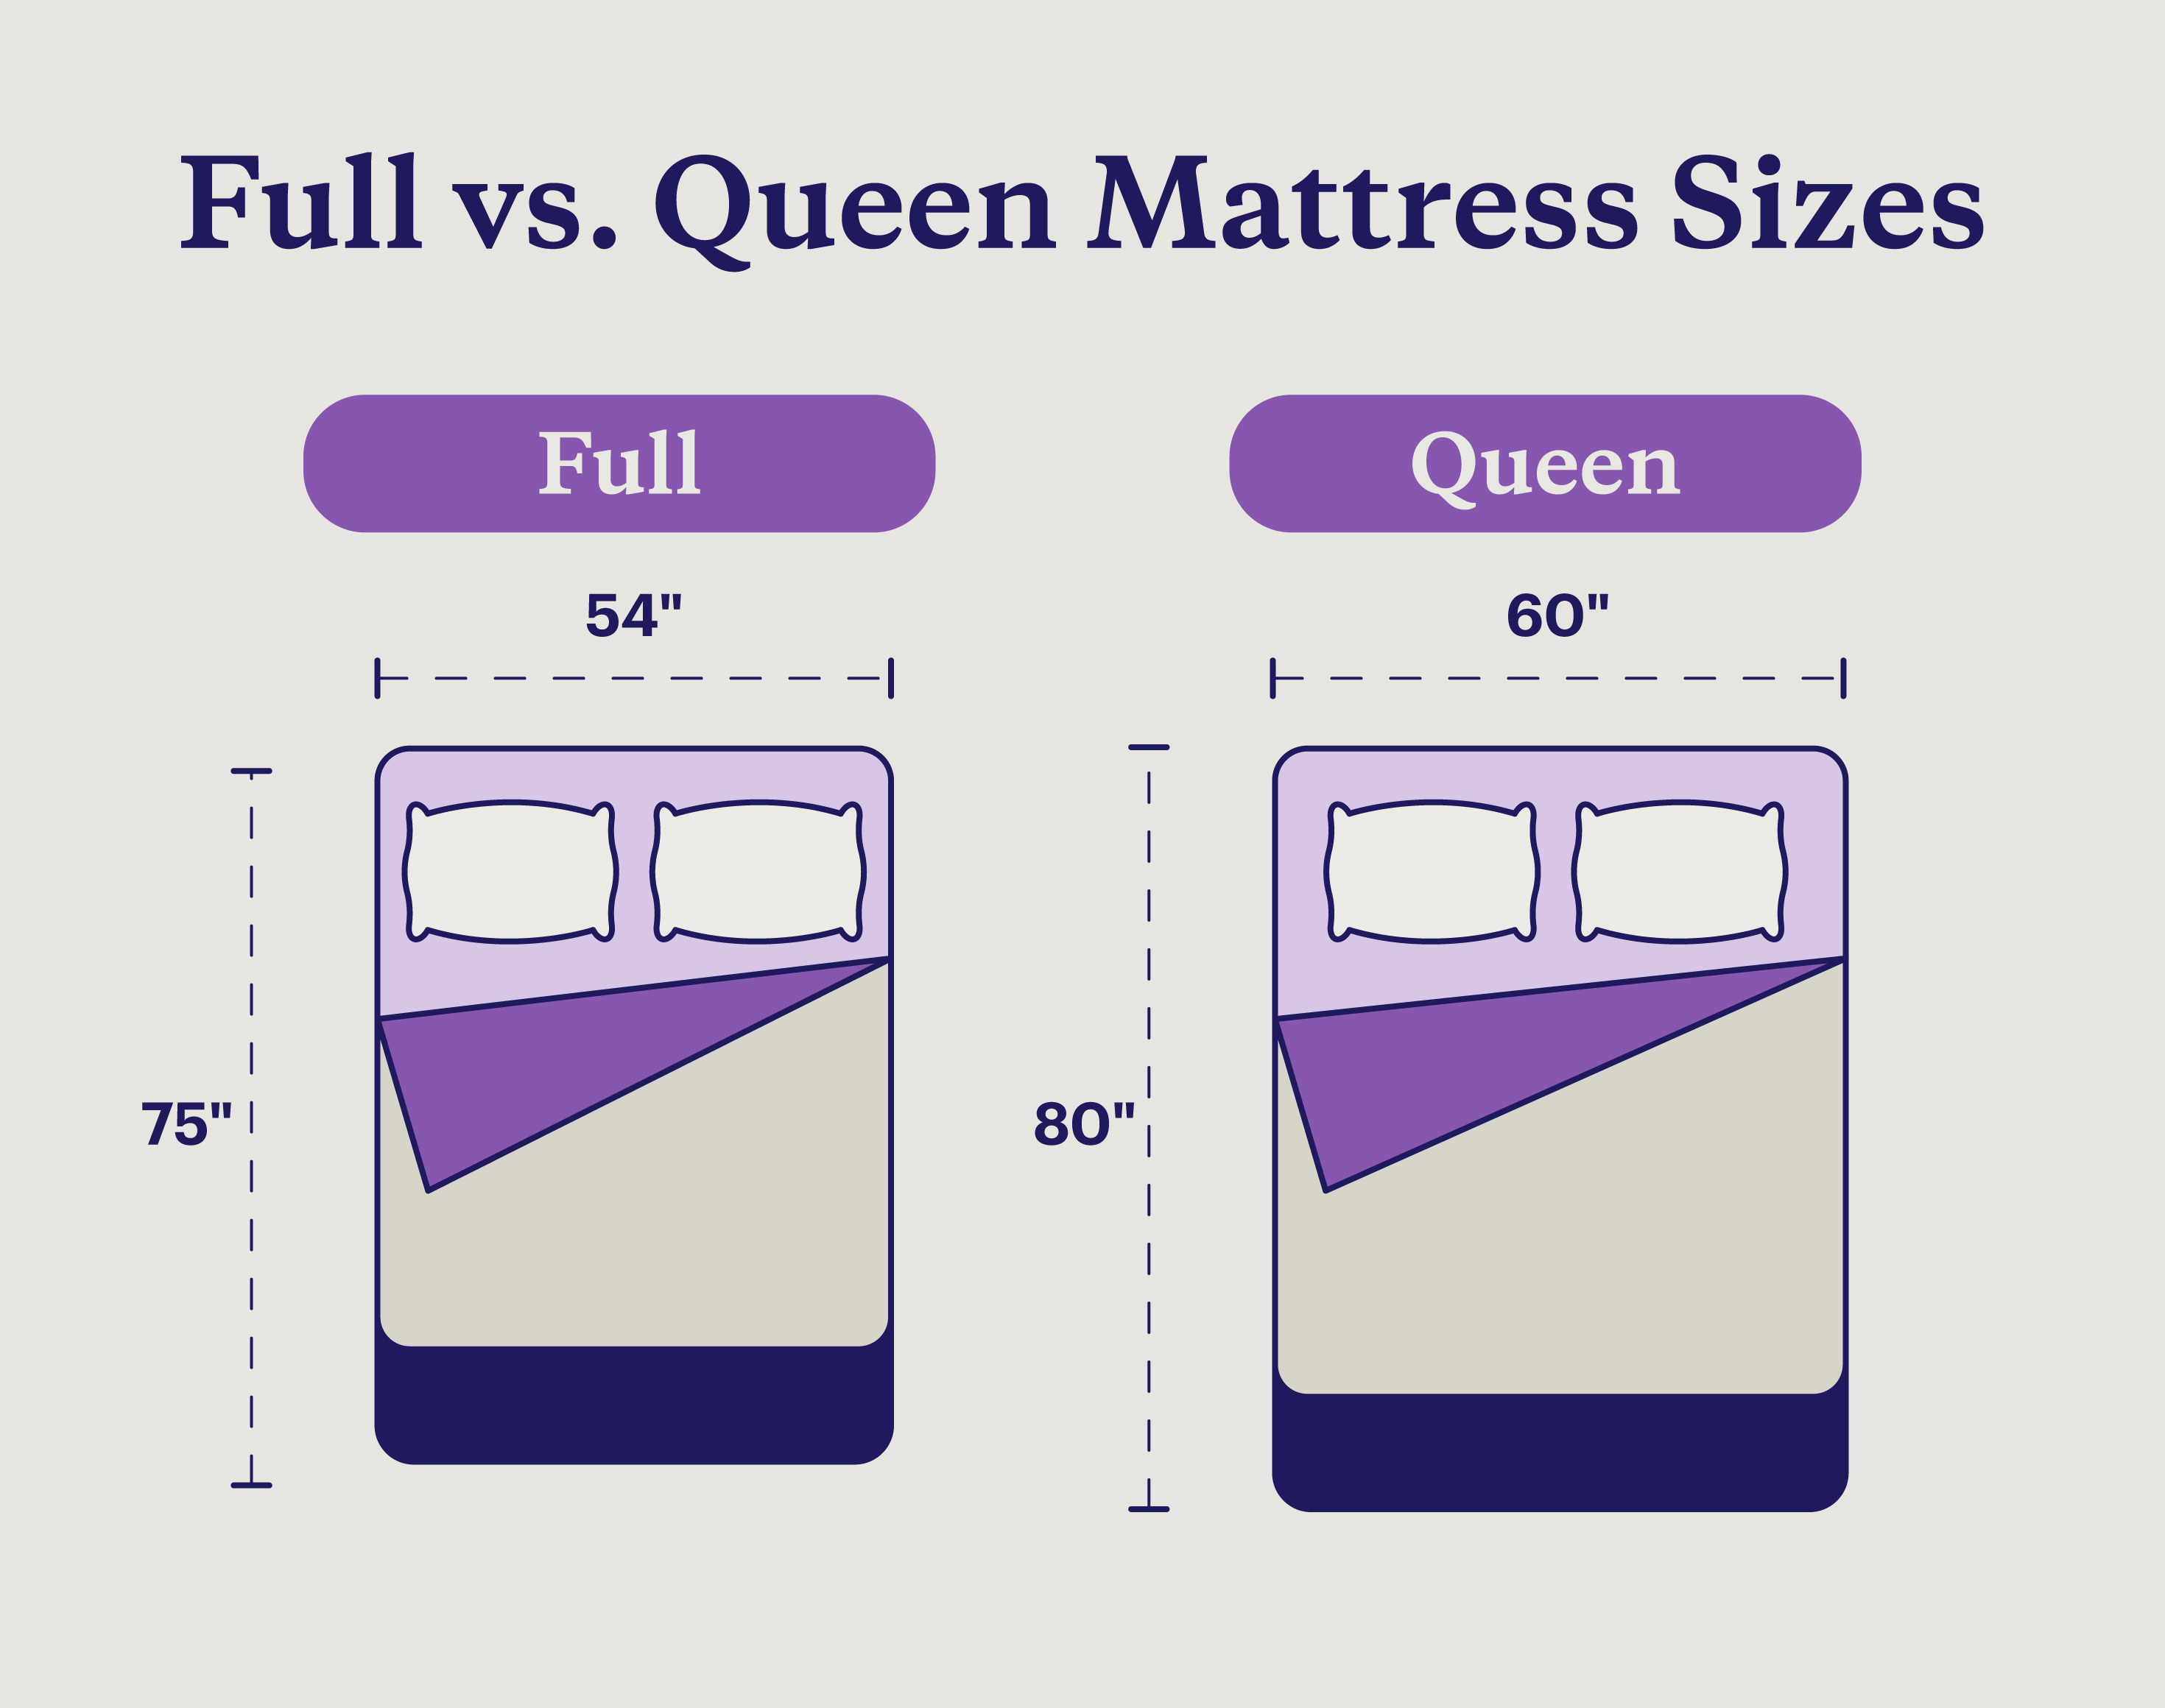 Illustration of two mattresses comparing the size difference between full vs queen beds.